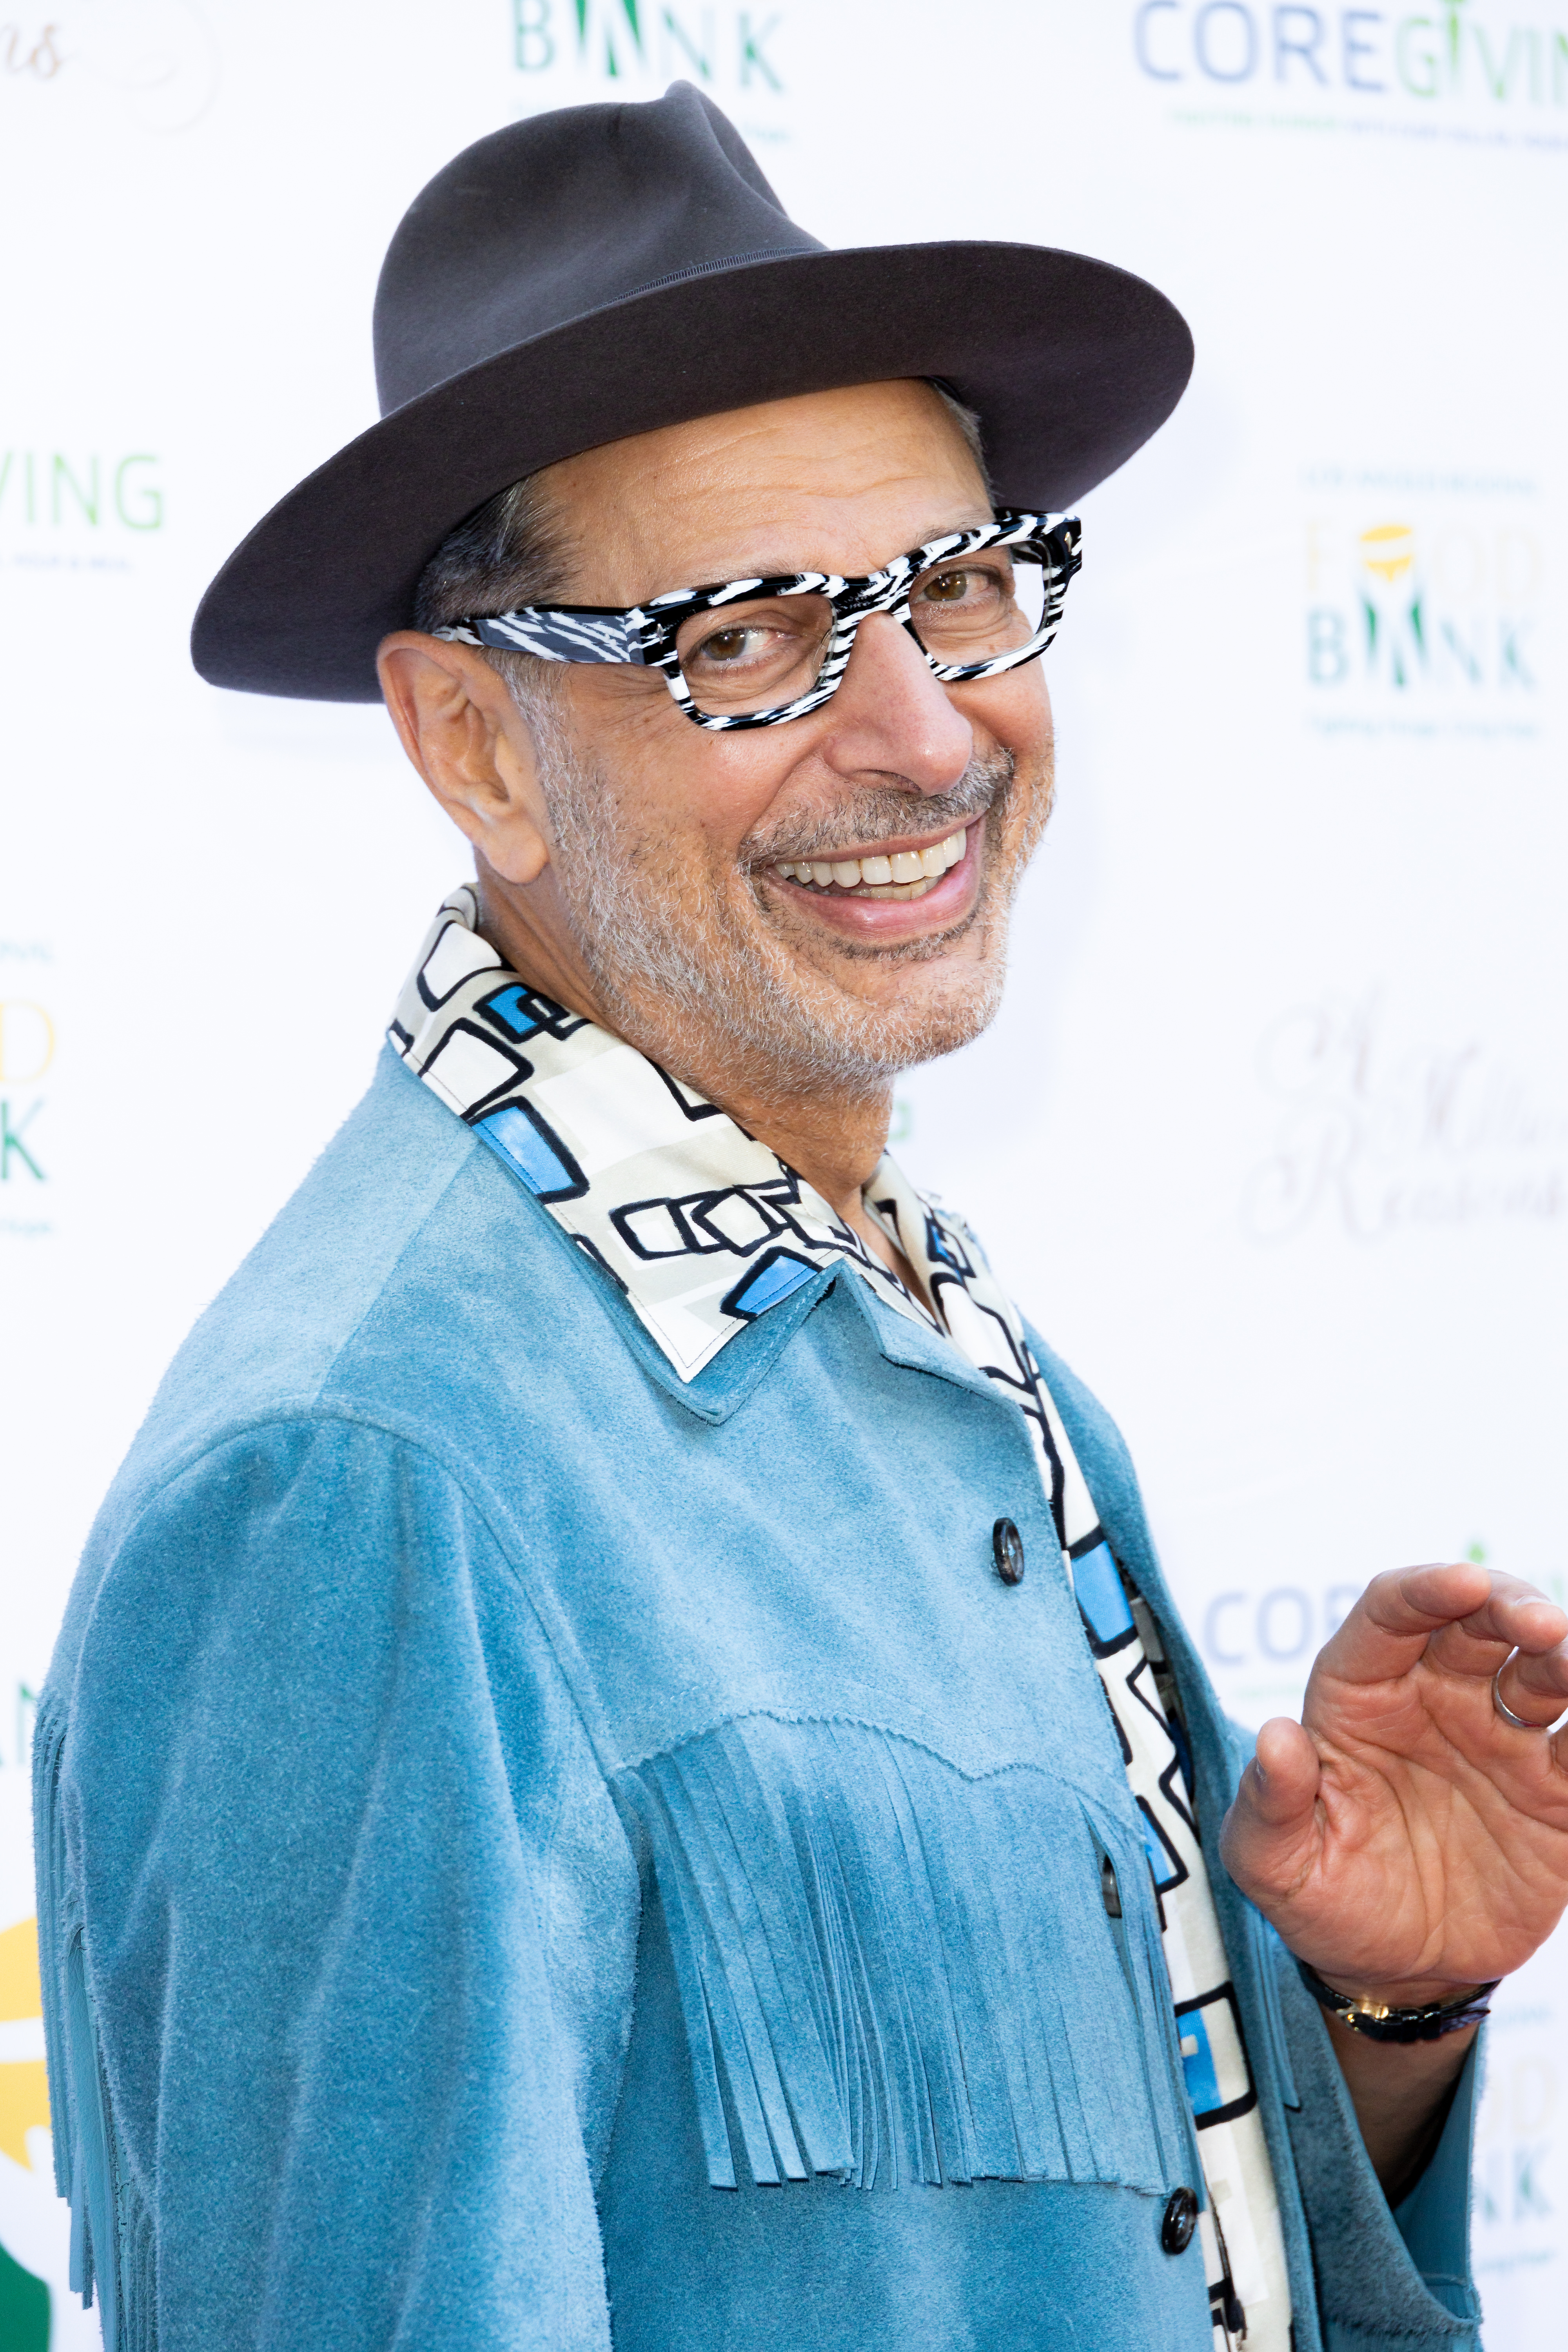 Man in a wide-brimmed hat and patterned shirt, smiling at a charity event